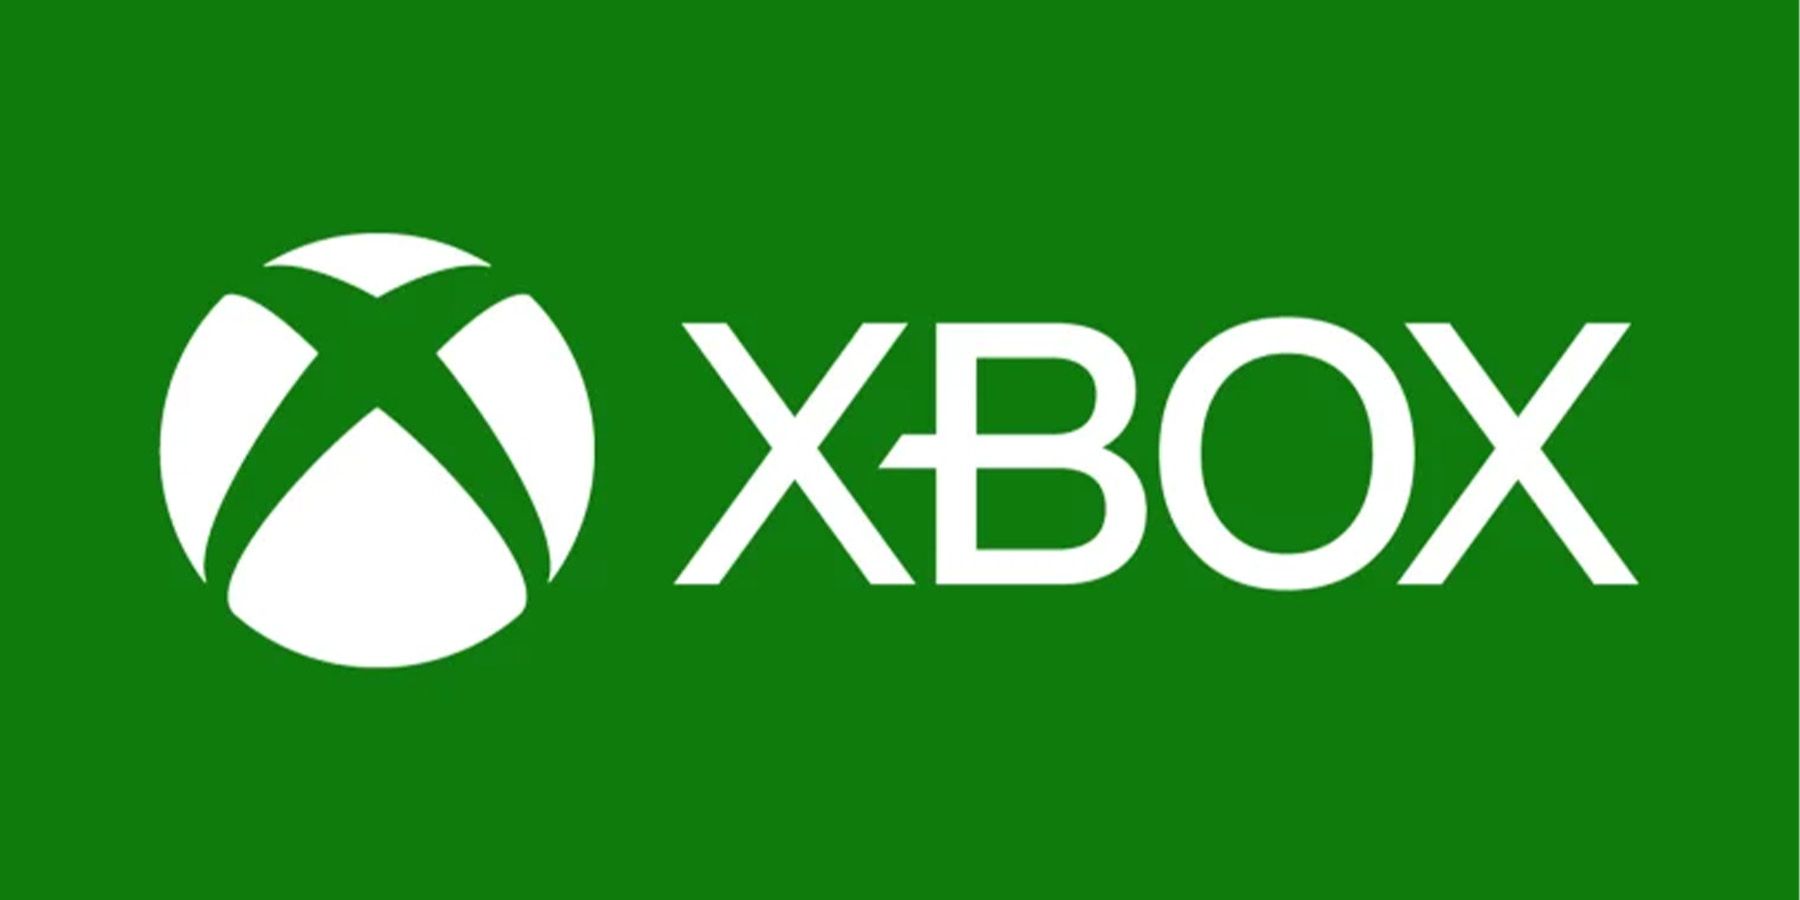 Xbox logo over green background